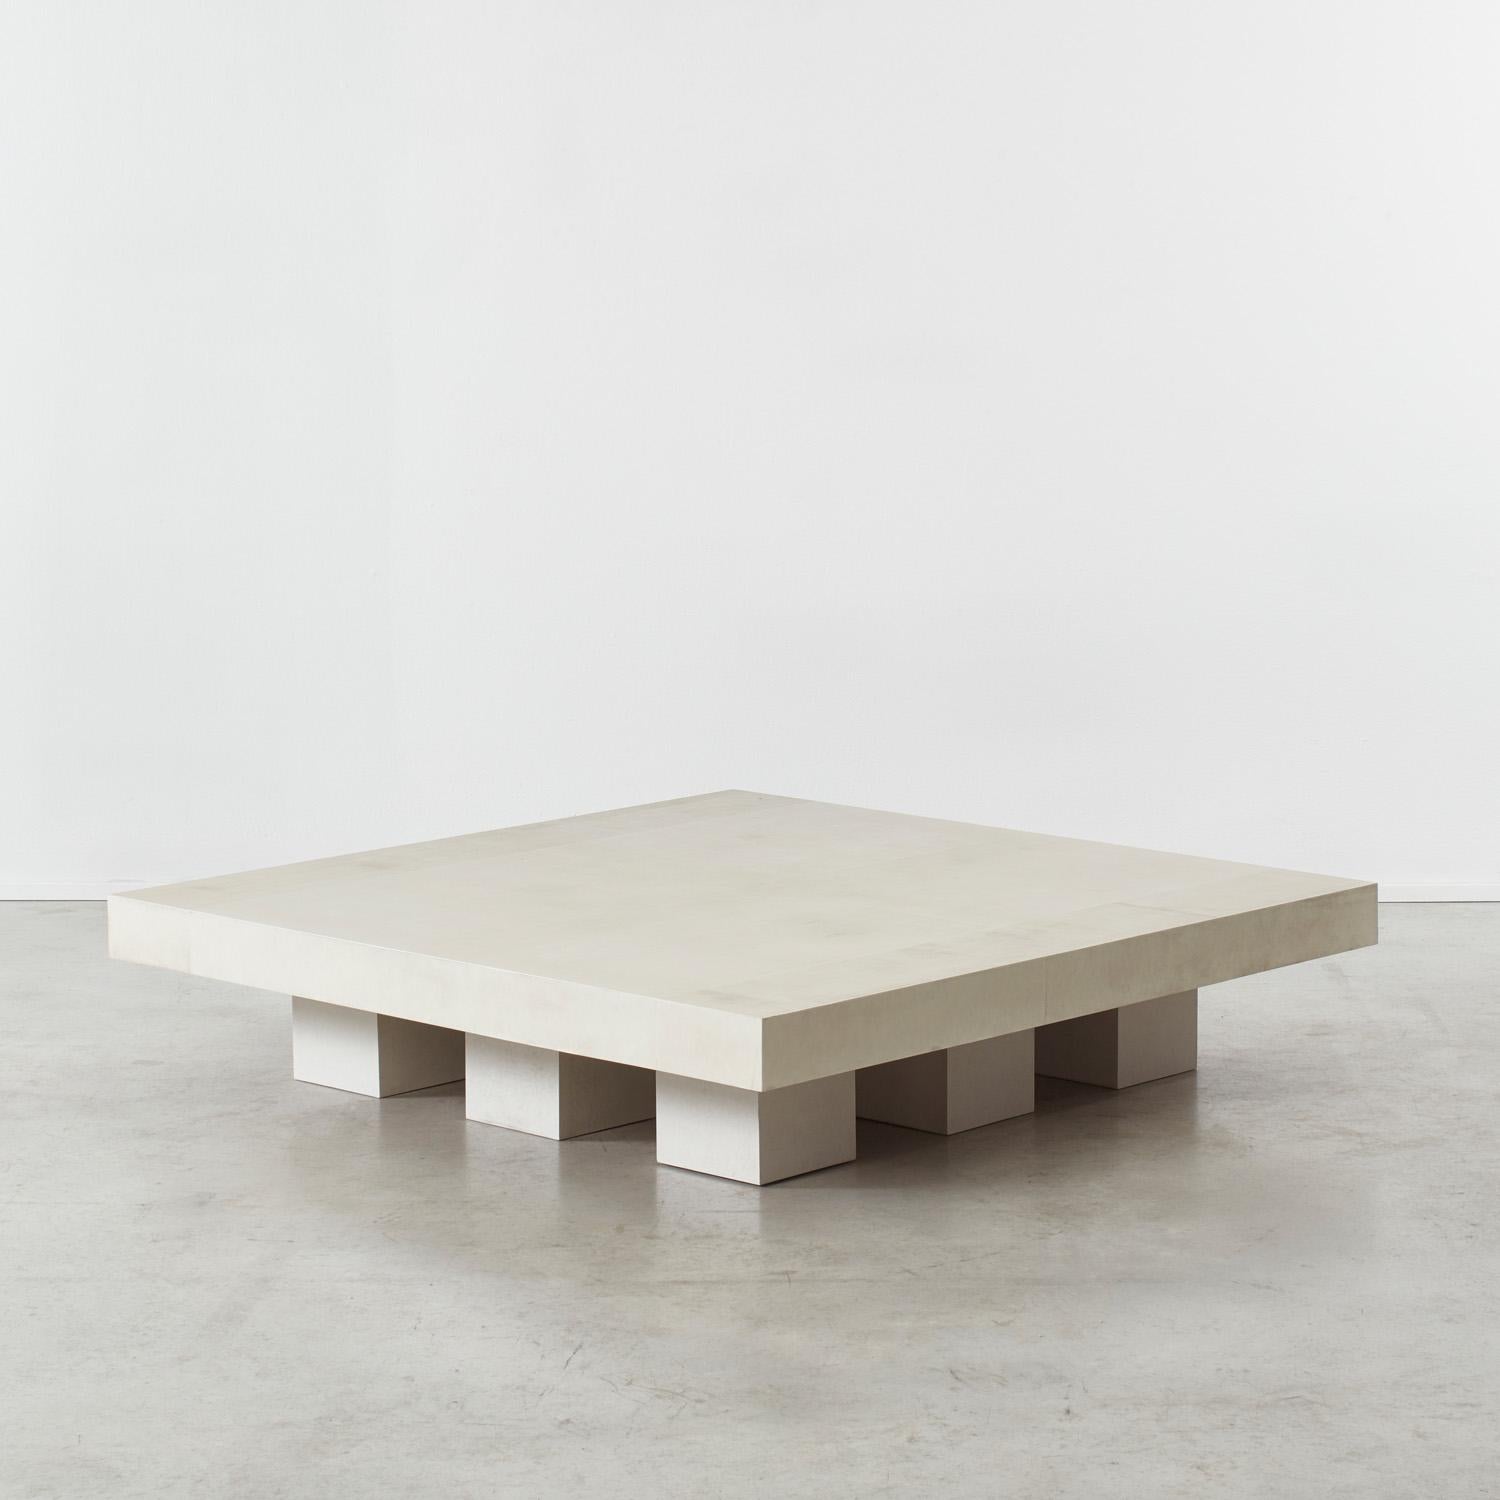 British David Horan Paper coffee table for Béton Brut, UK, 2022 For Sale